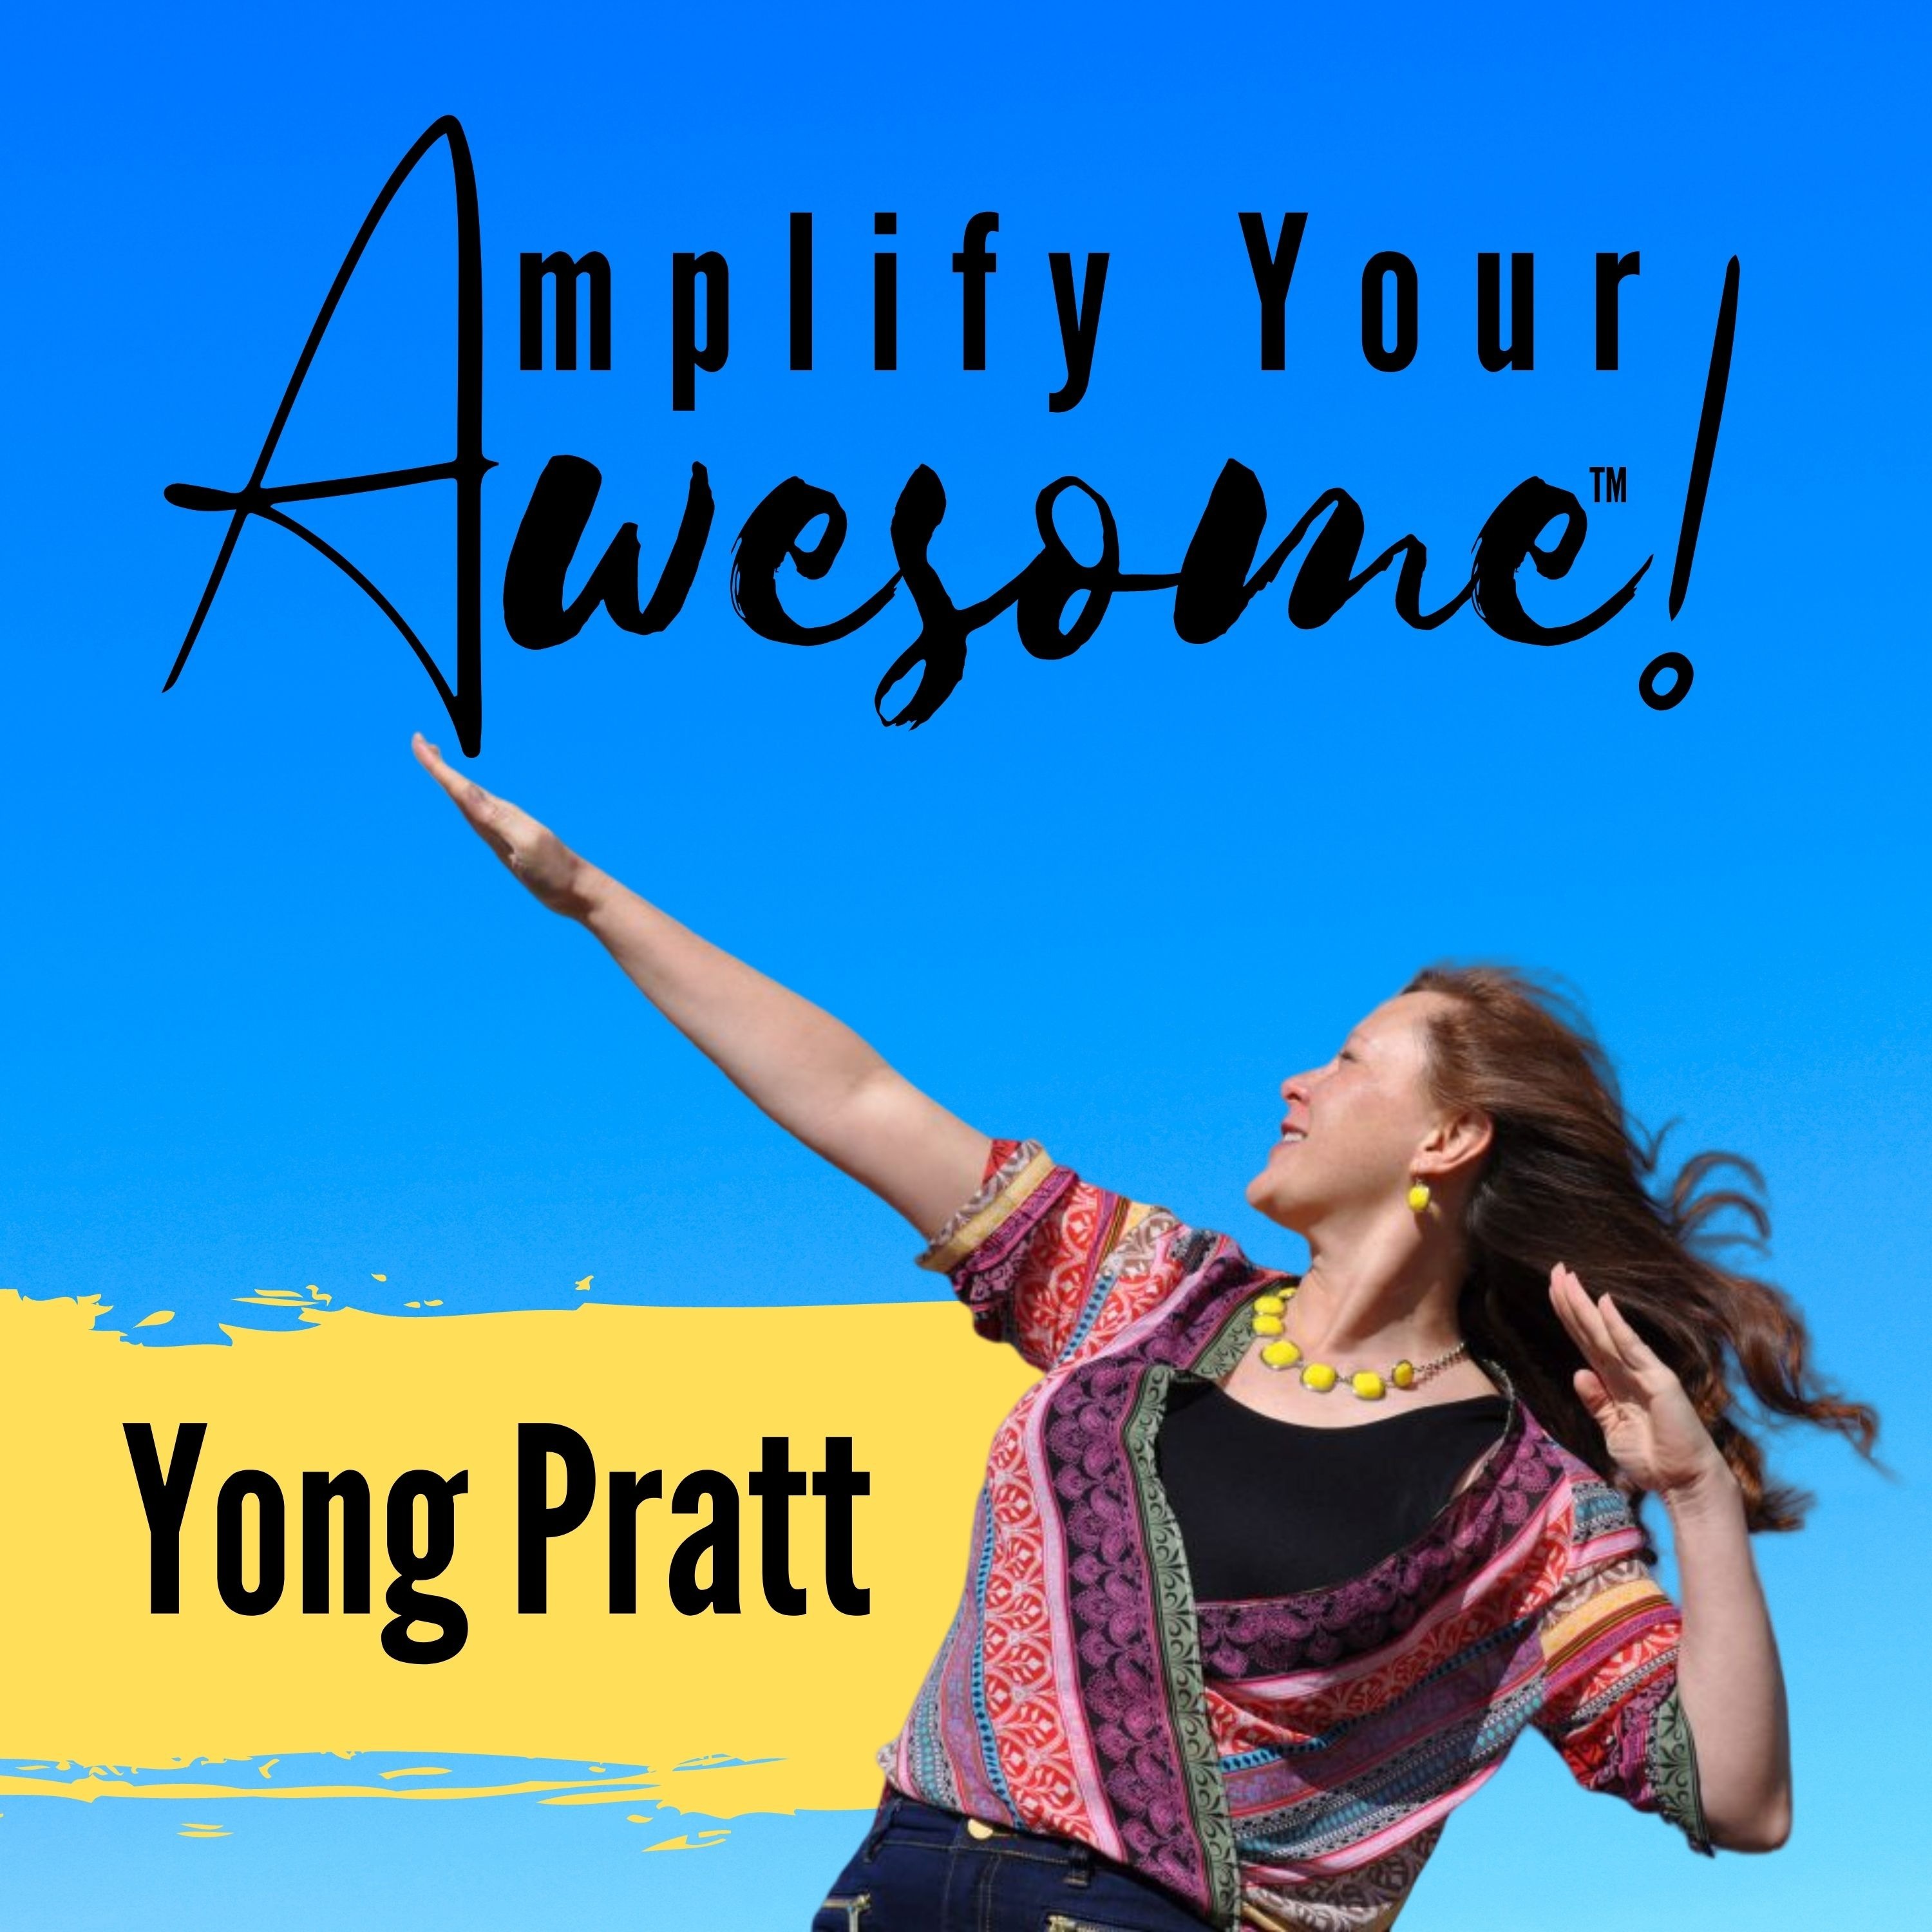 Amplify Your Awesome™ with Yong Pratt